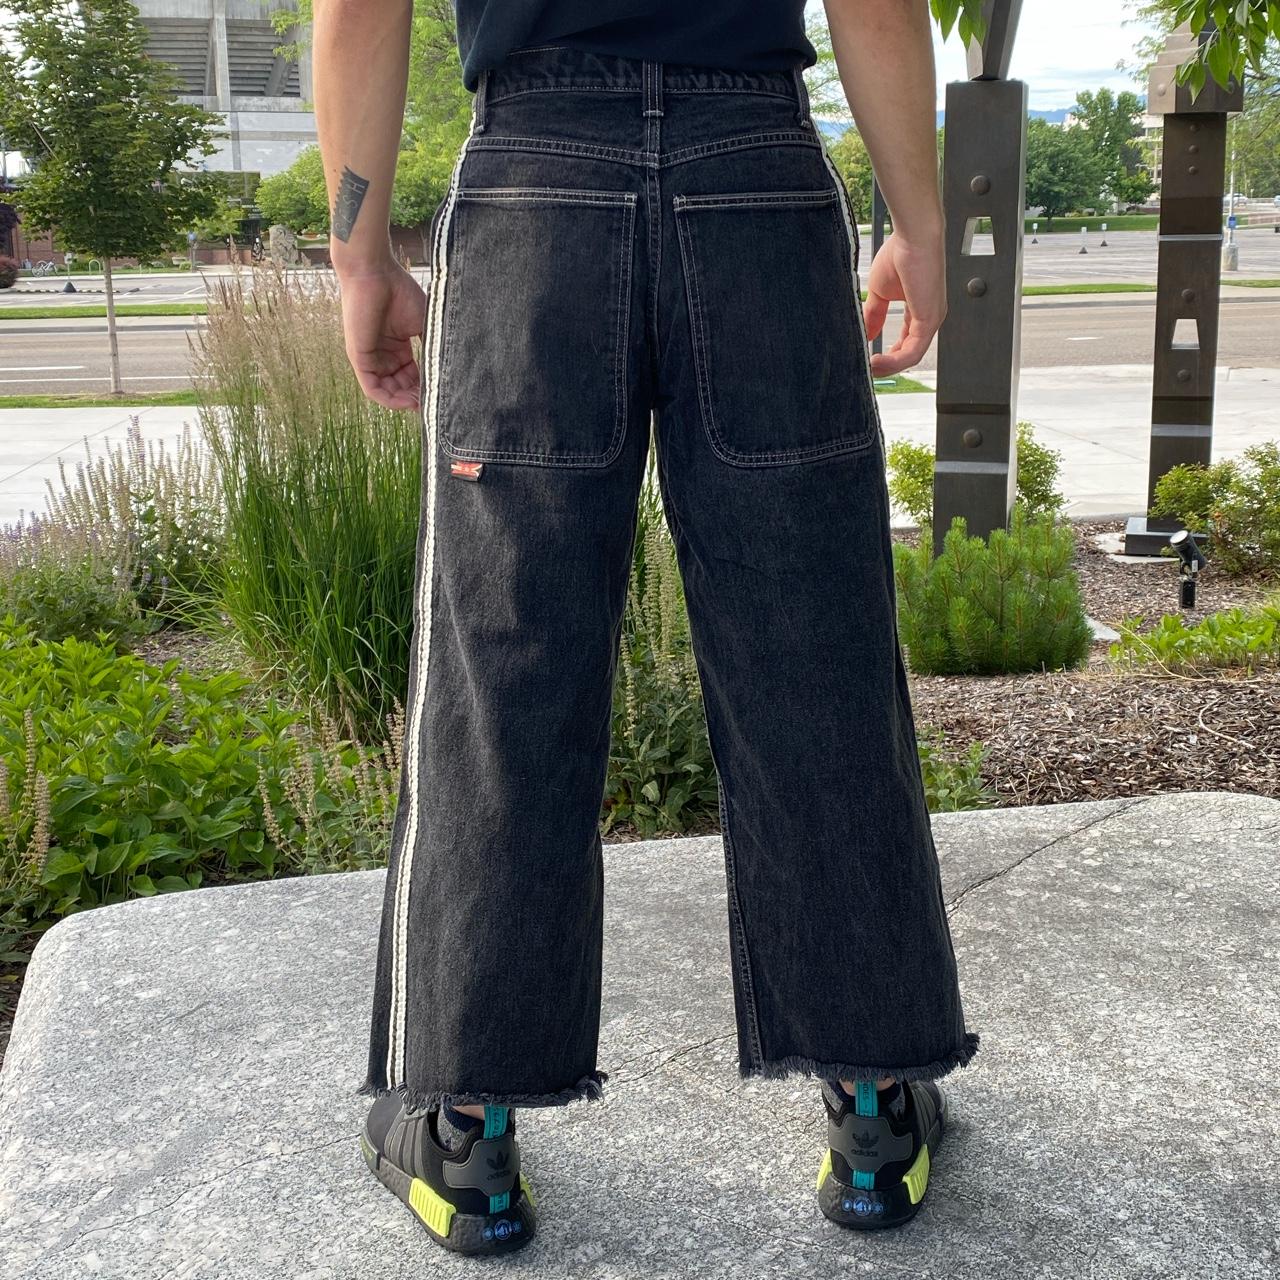 90s Skunk Jnco jeans 31x30 (ankles have been cut)... - Depop